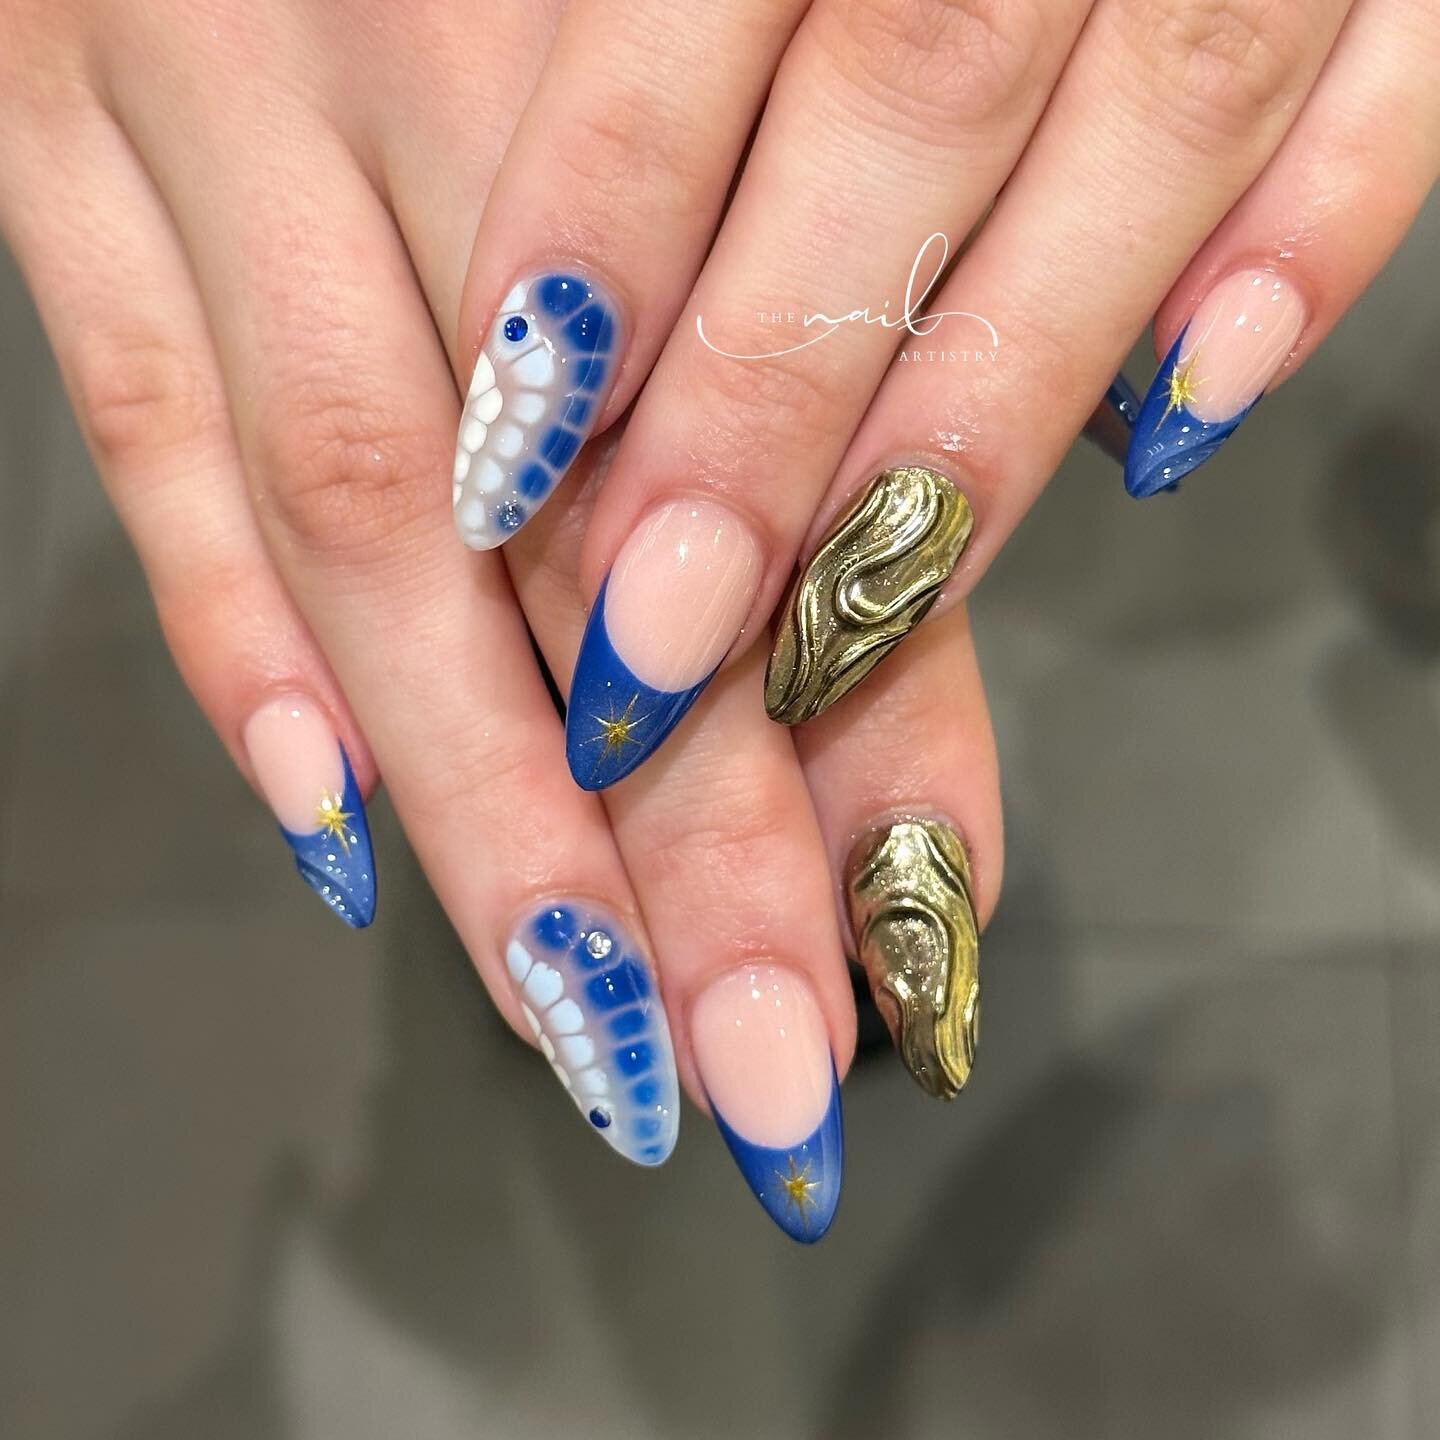 🖇️✨A breathtaking blue 🎧💙🦋

💅🏻 Who else love Mix n Match nail arts? Blooming gel, Gold 3D with airbrush French Tips 🫶🏻
📲 Book with us via link in bio 
☎️ 020 7018 6636
.
.
.
.
.
.
#mixnmatchnails #3dnails #3dnailart #nailsdesign #airbrushnai